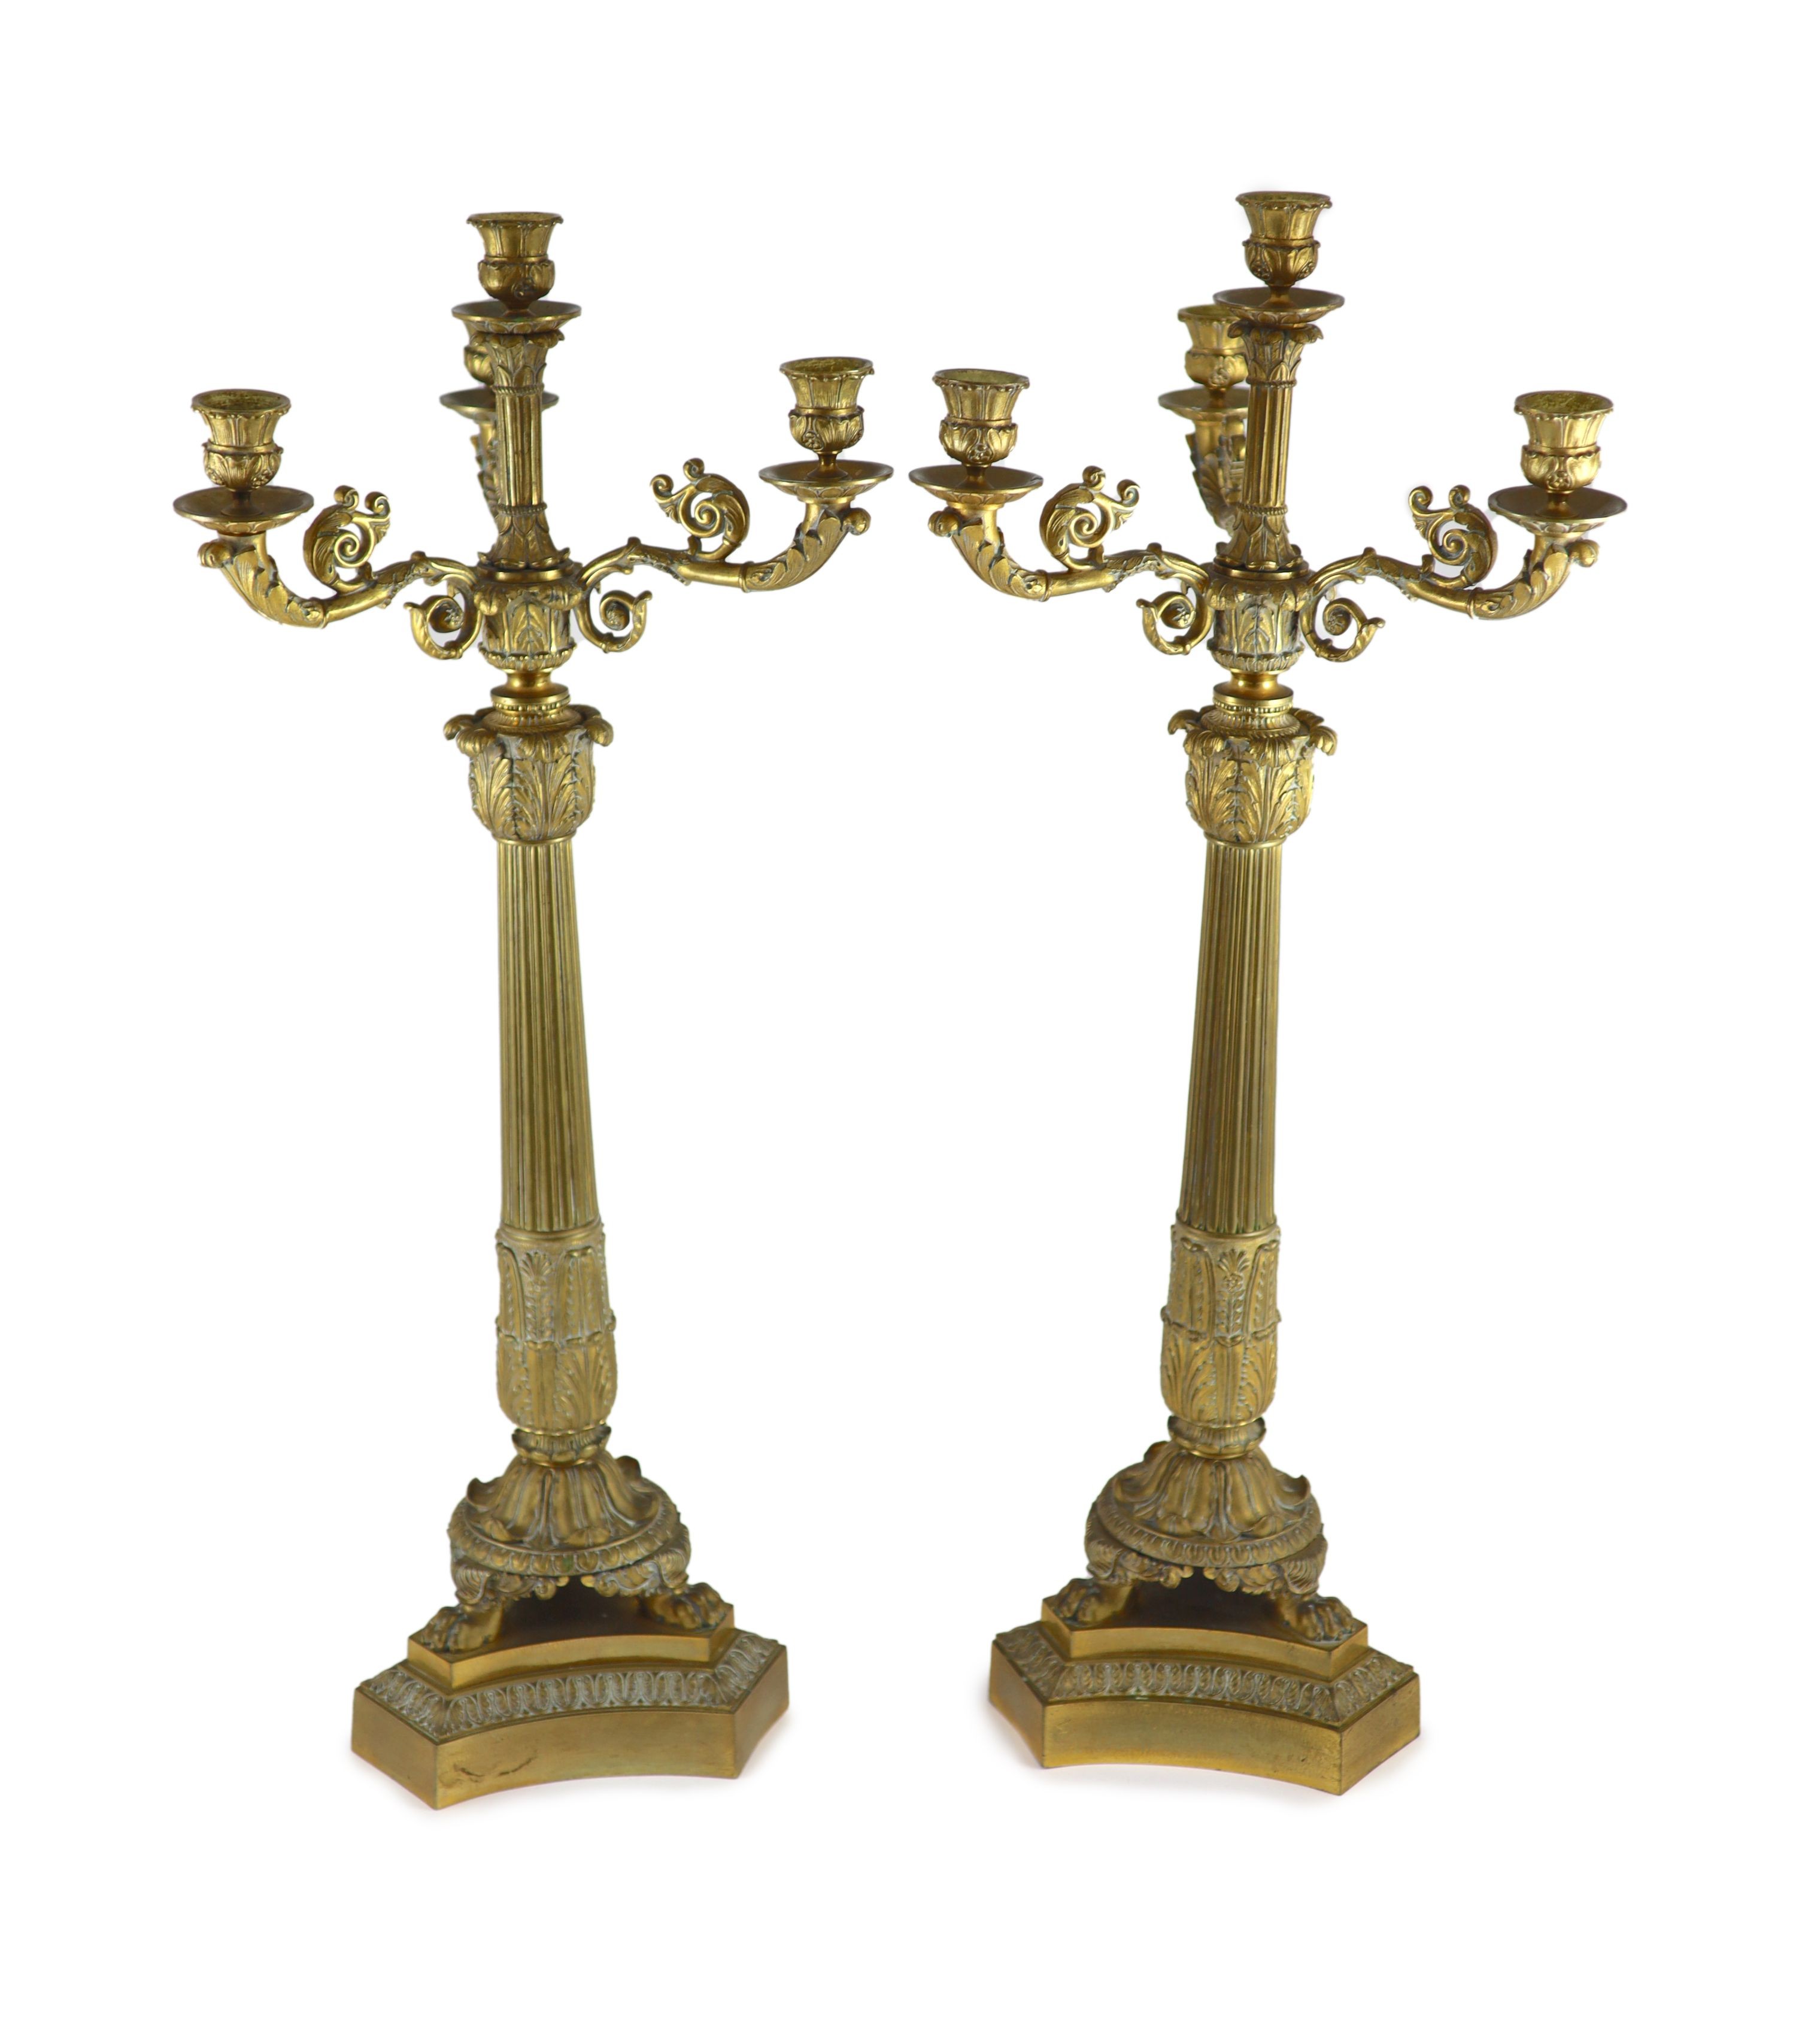 A pair of 19th century French Empire style ormolu candelabra height 70.5cm